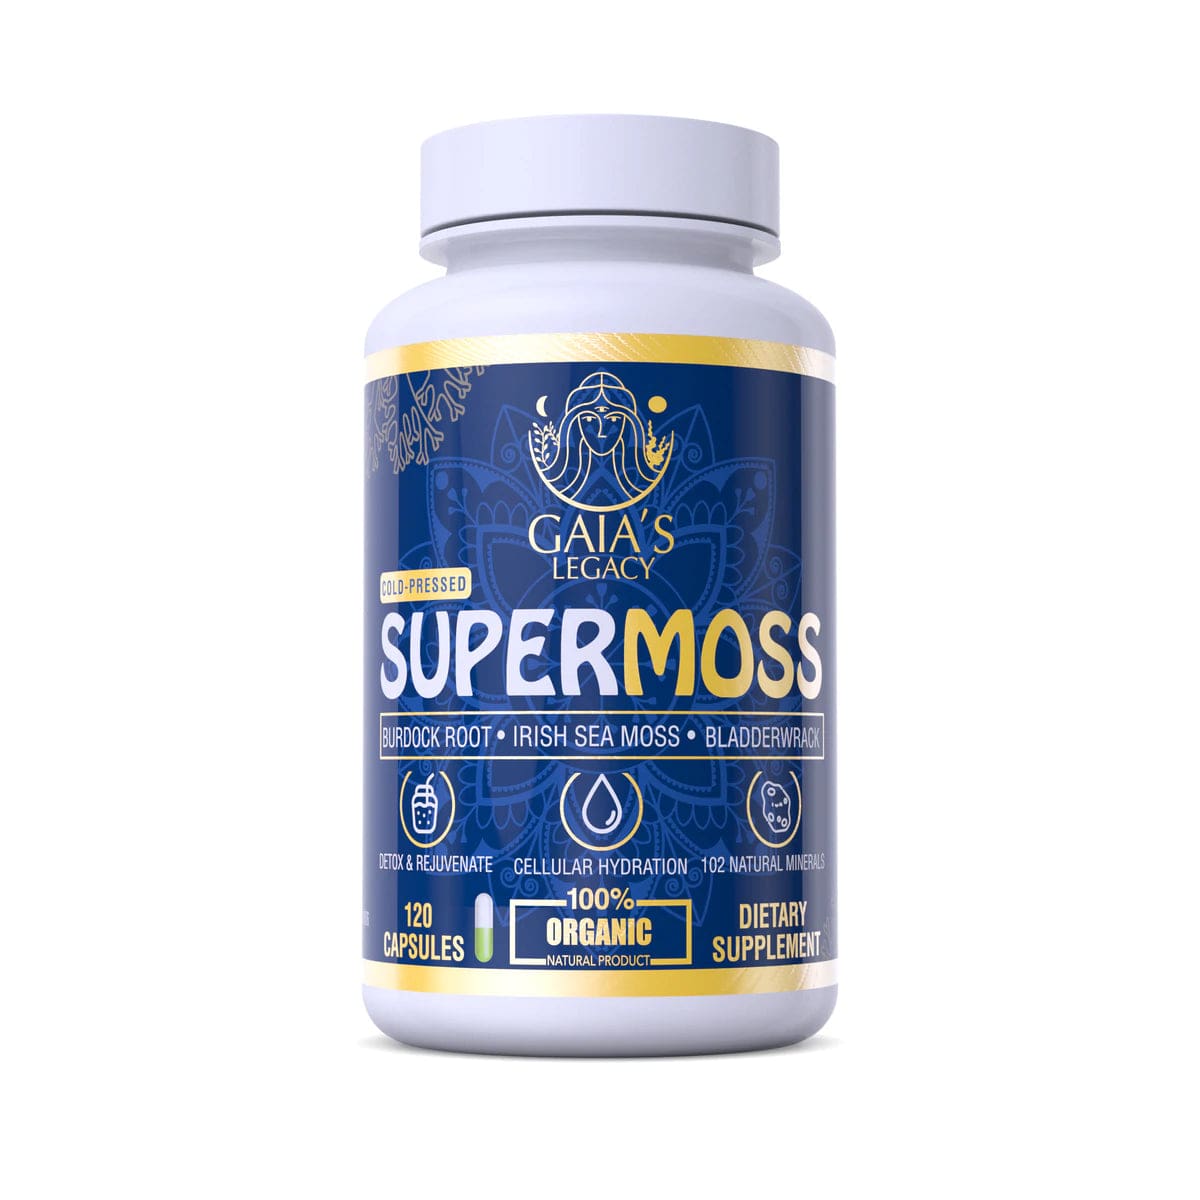 GAIA'S LEGACYSuper Moss | 4-in-1 Superfood Blend100% Organic 4-in-1 Superfood BlendRED SUPPS